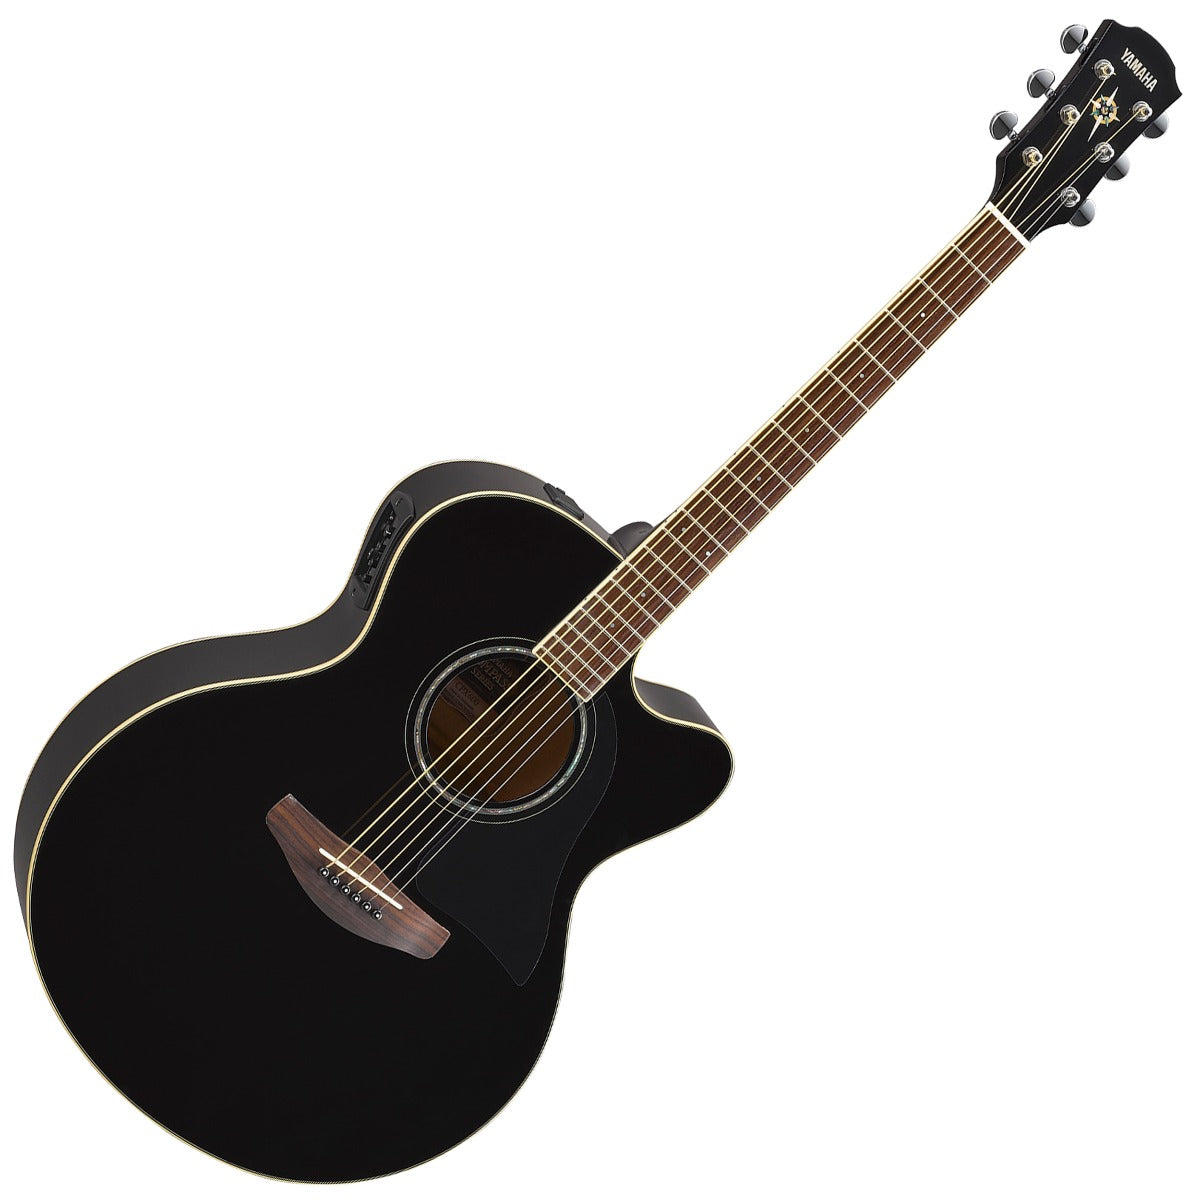 Yamaha CPX600 Acoustic-Electric Guitar - Black